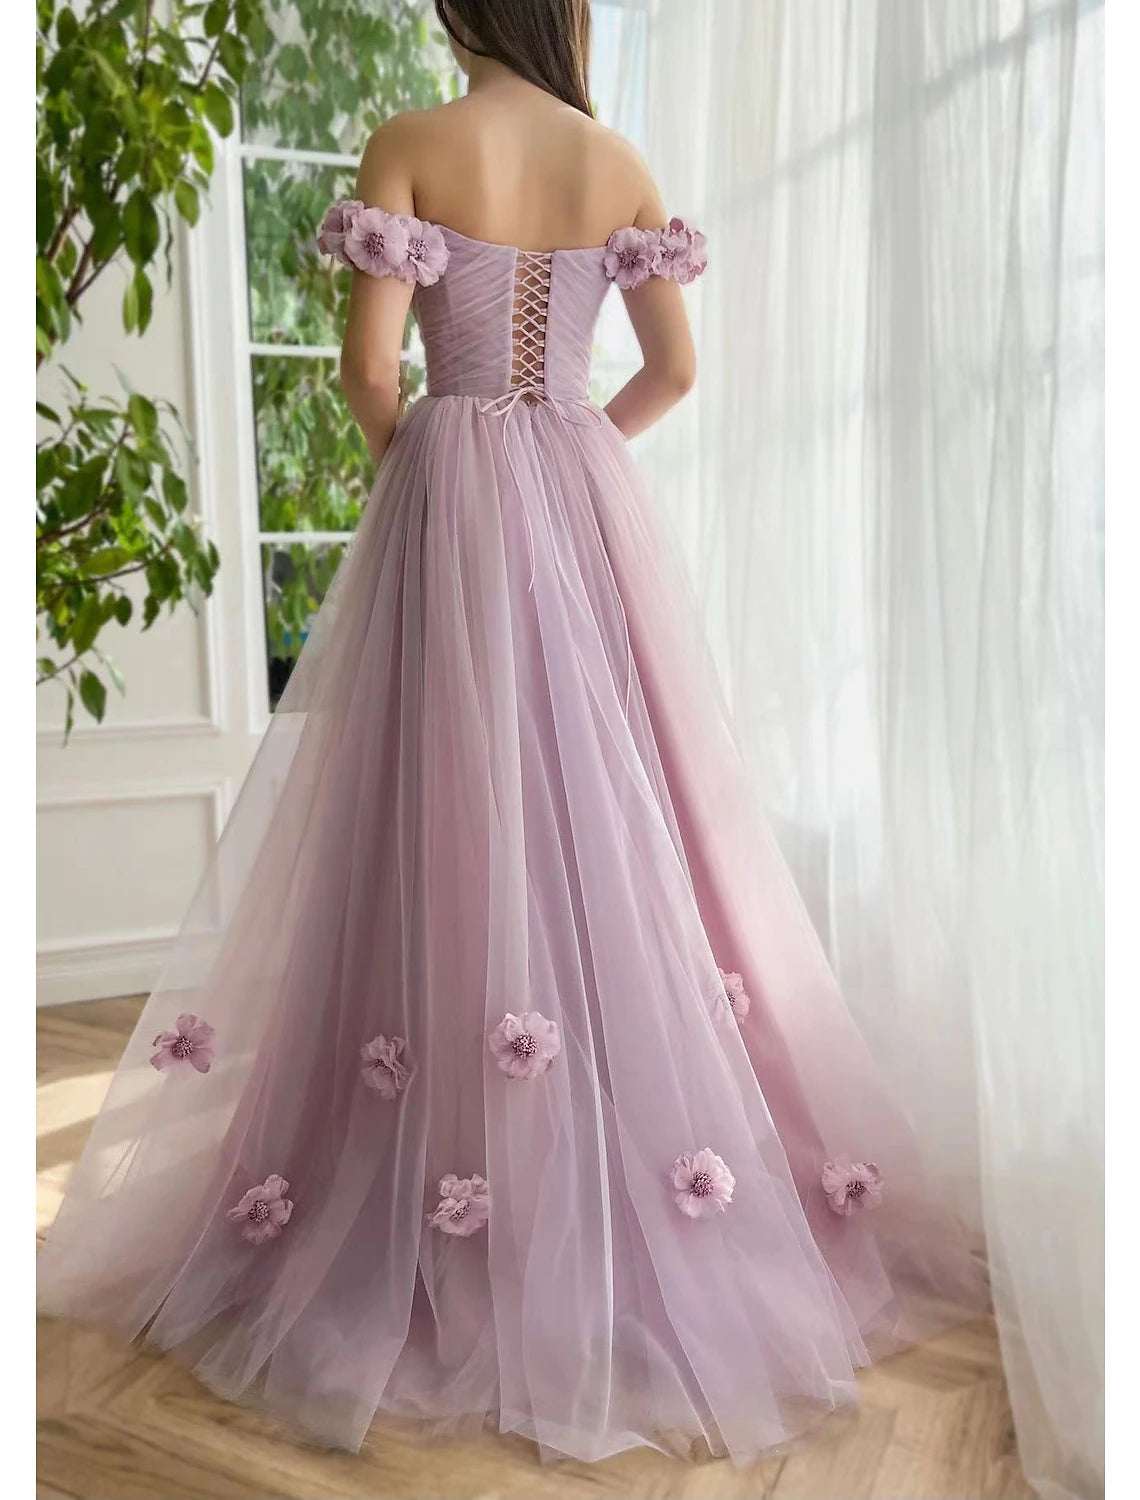 A-Line Evening Gown Empire Dress Wedding Guest Prom Floor Length Short Sleeve Sweetheart Cotton Backless with Slit Appliques Strappy